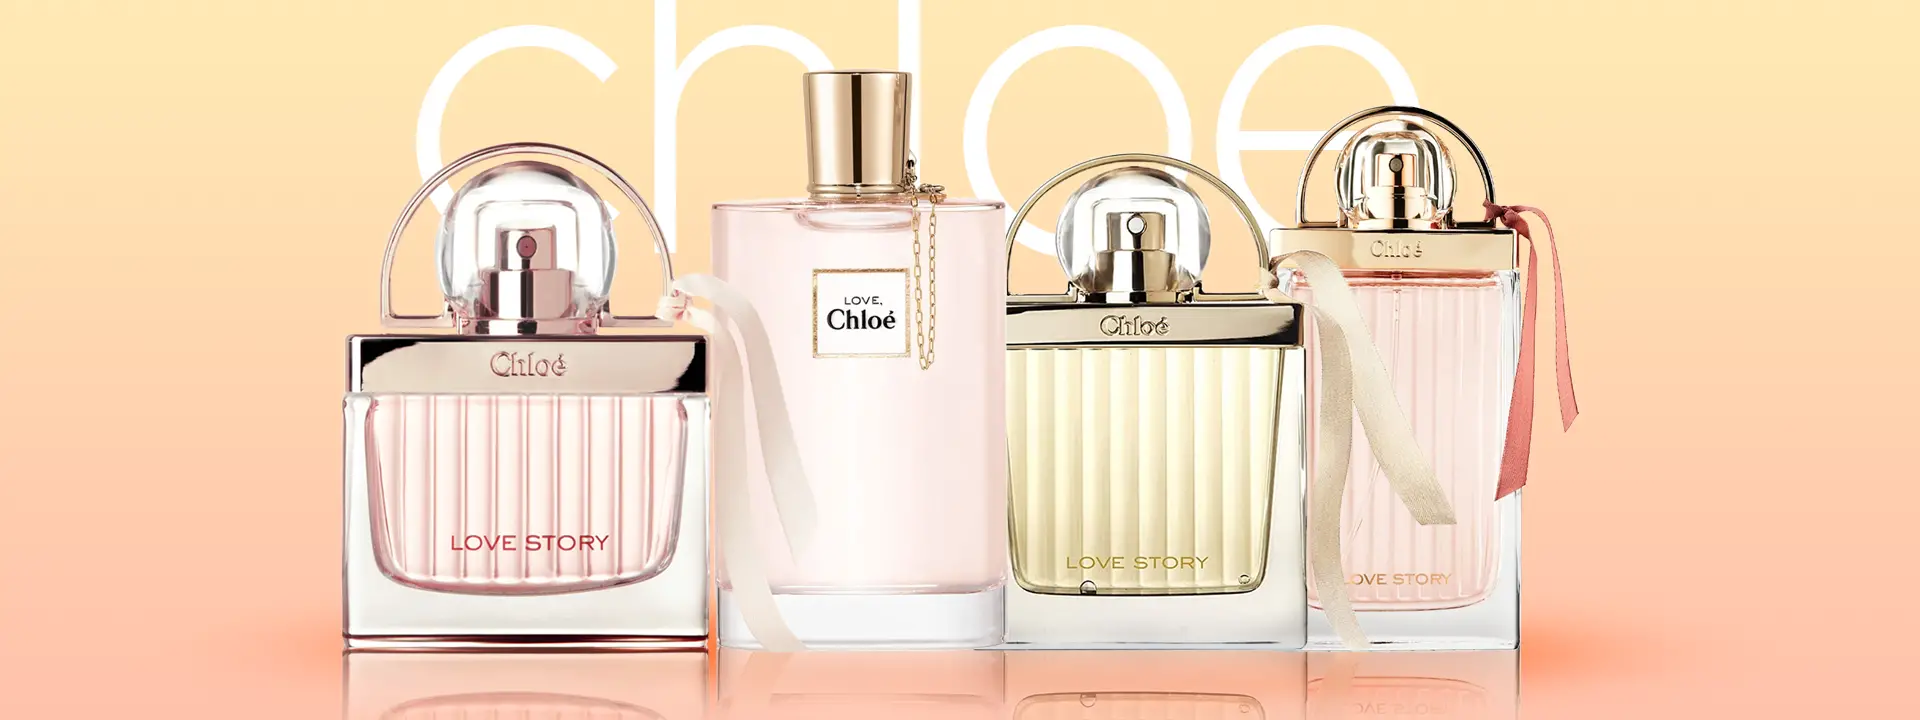 The Ultimate Guide To The Chloé Love Story Perfumes